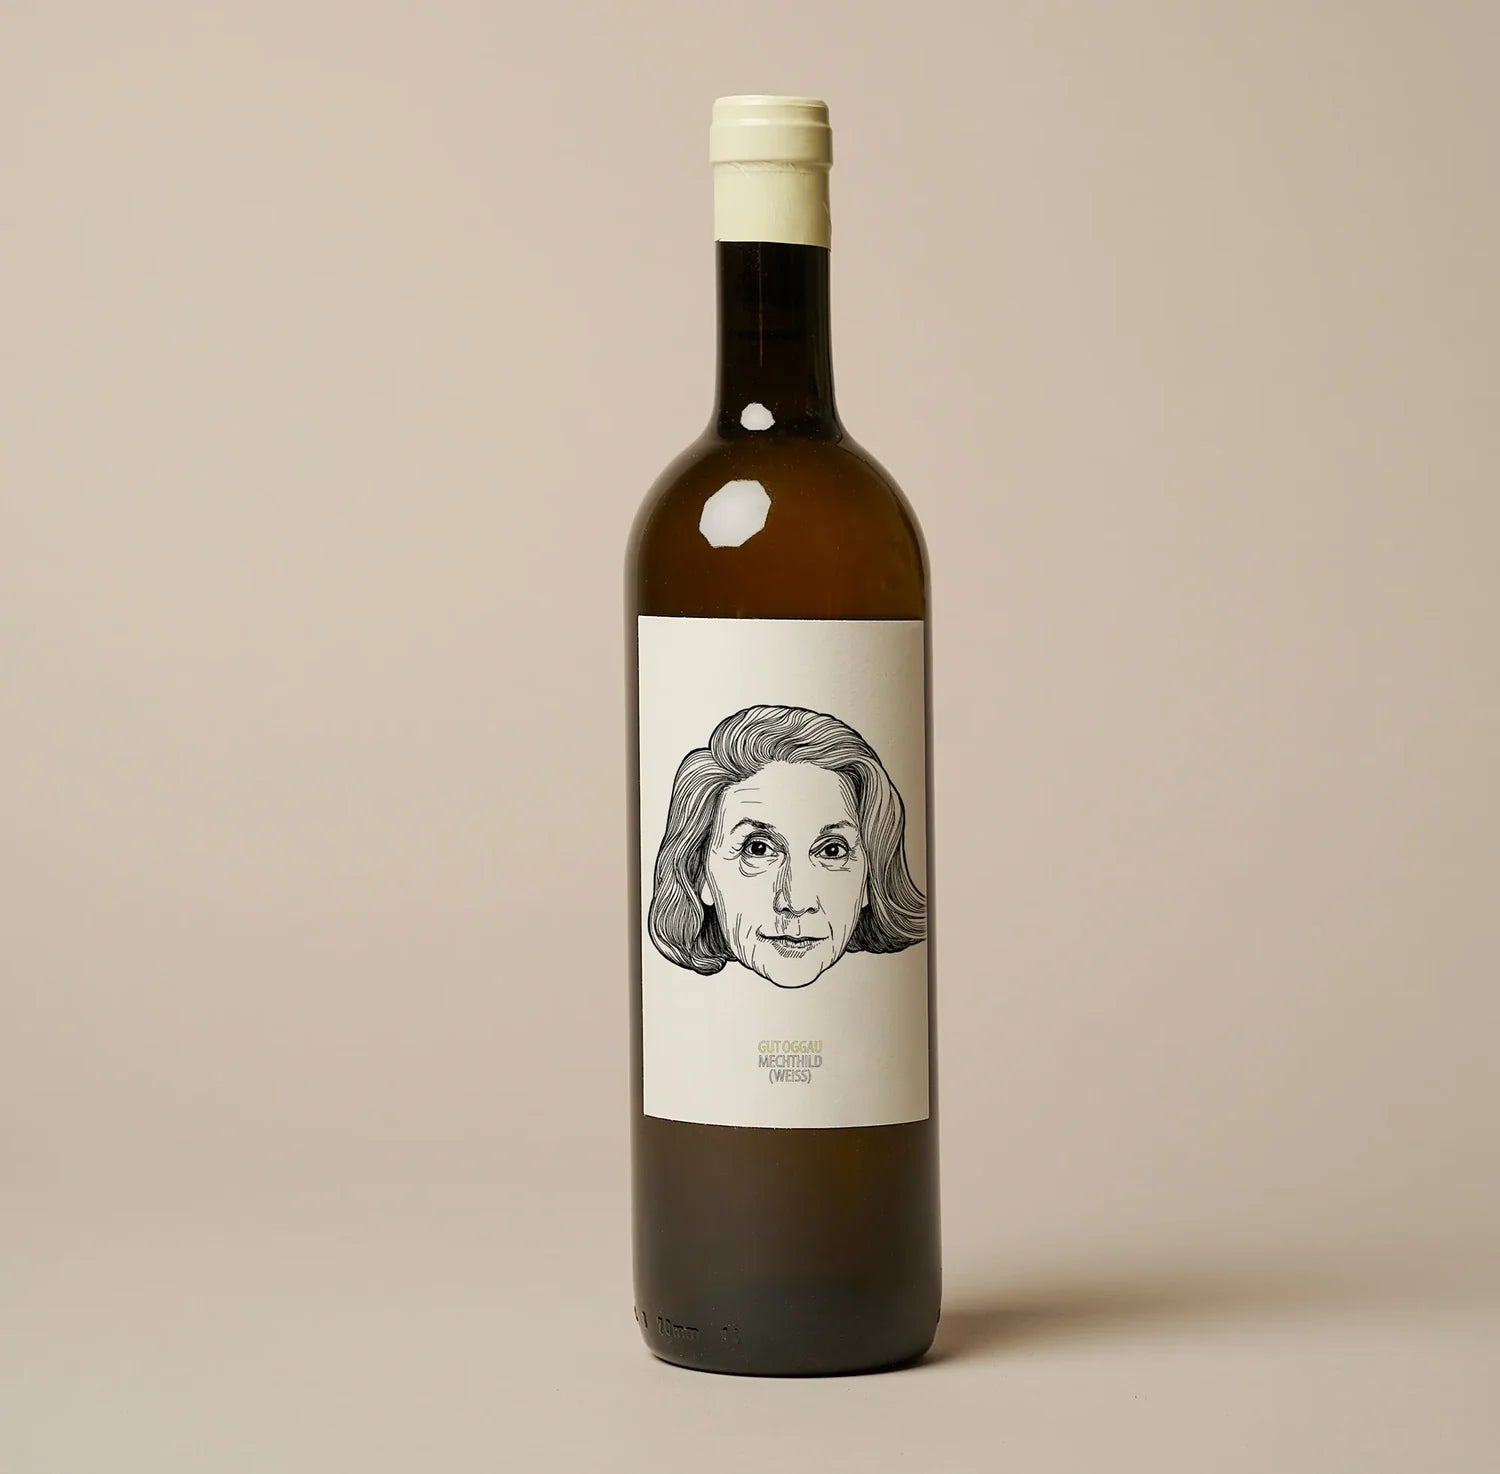 wine bottle with old woman face on label